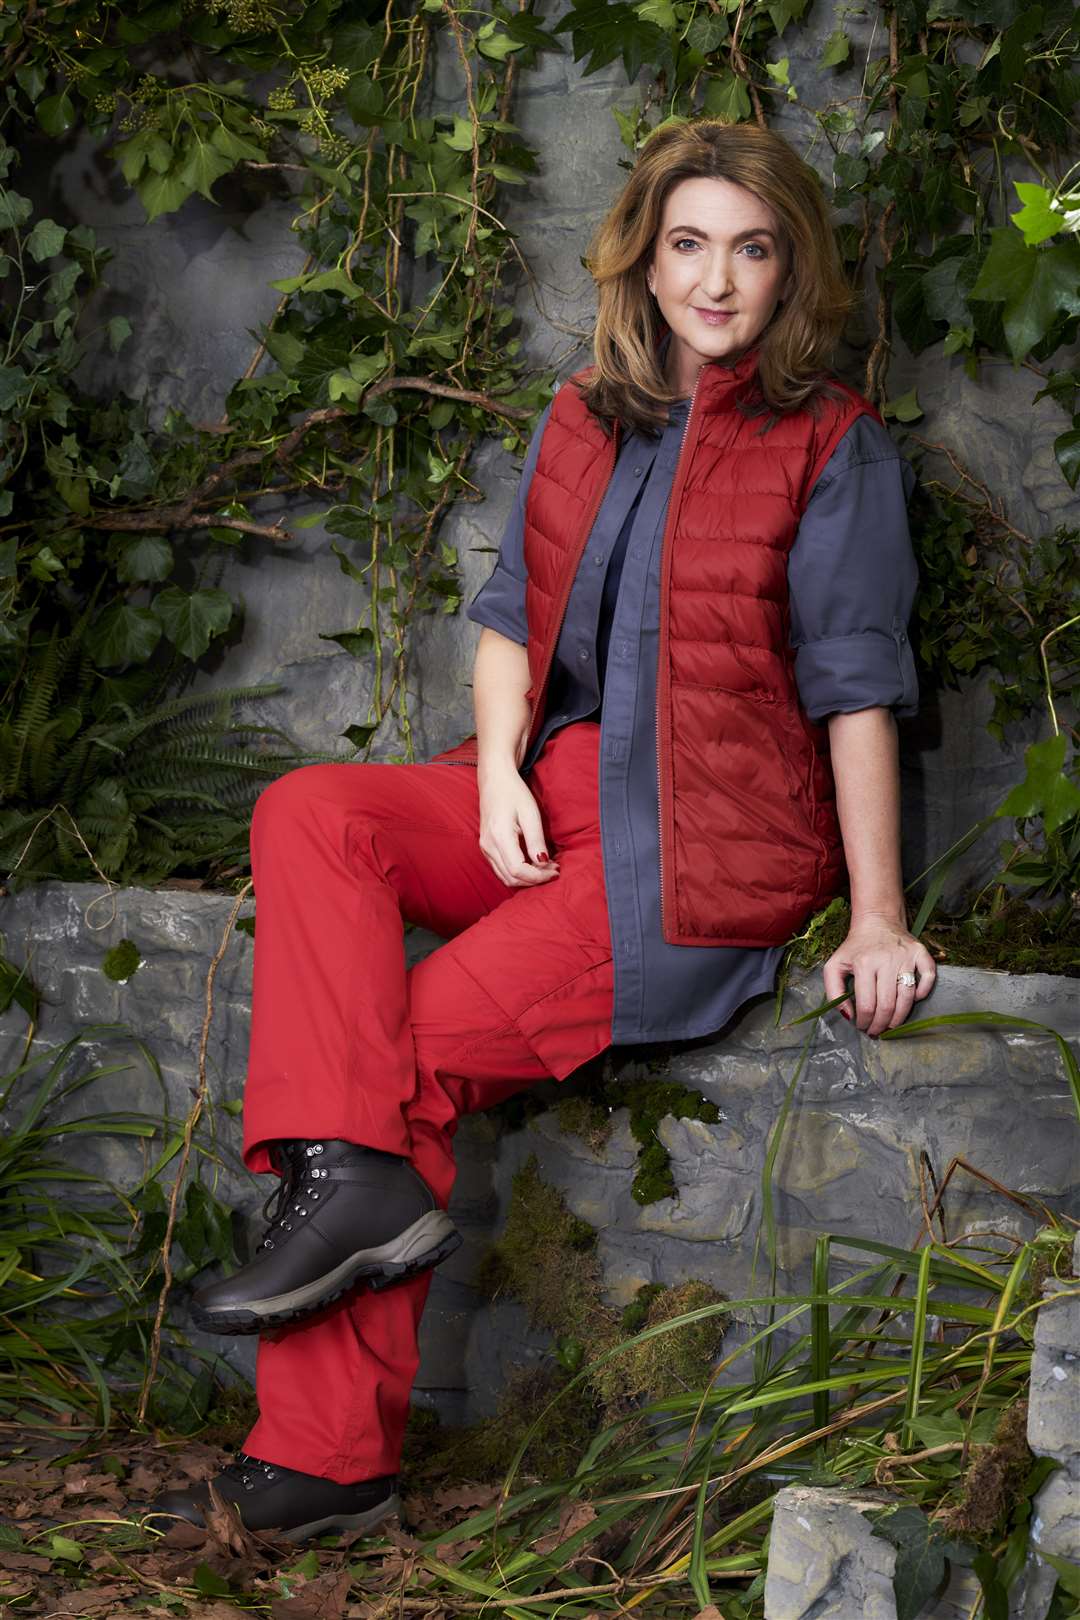 Victoria Derbyshire is also one of the campmates at Gwrych Castle (ITV)